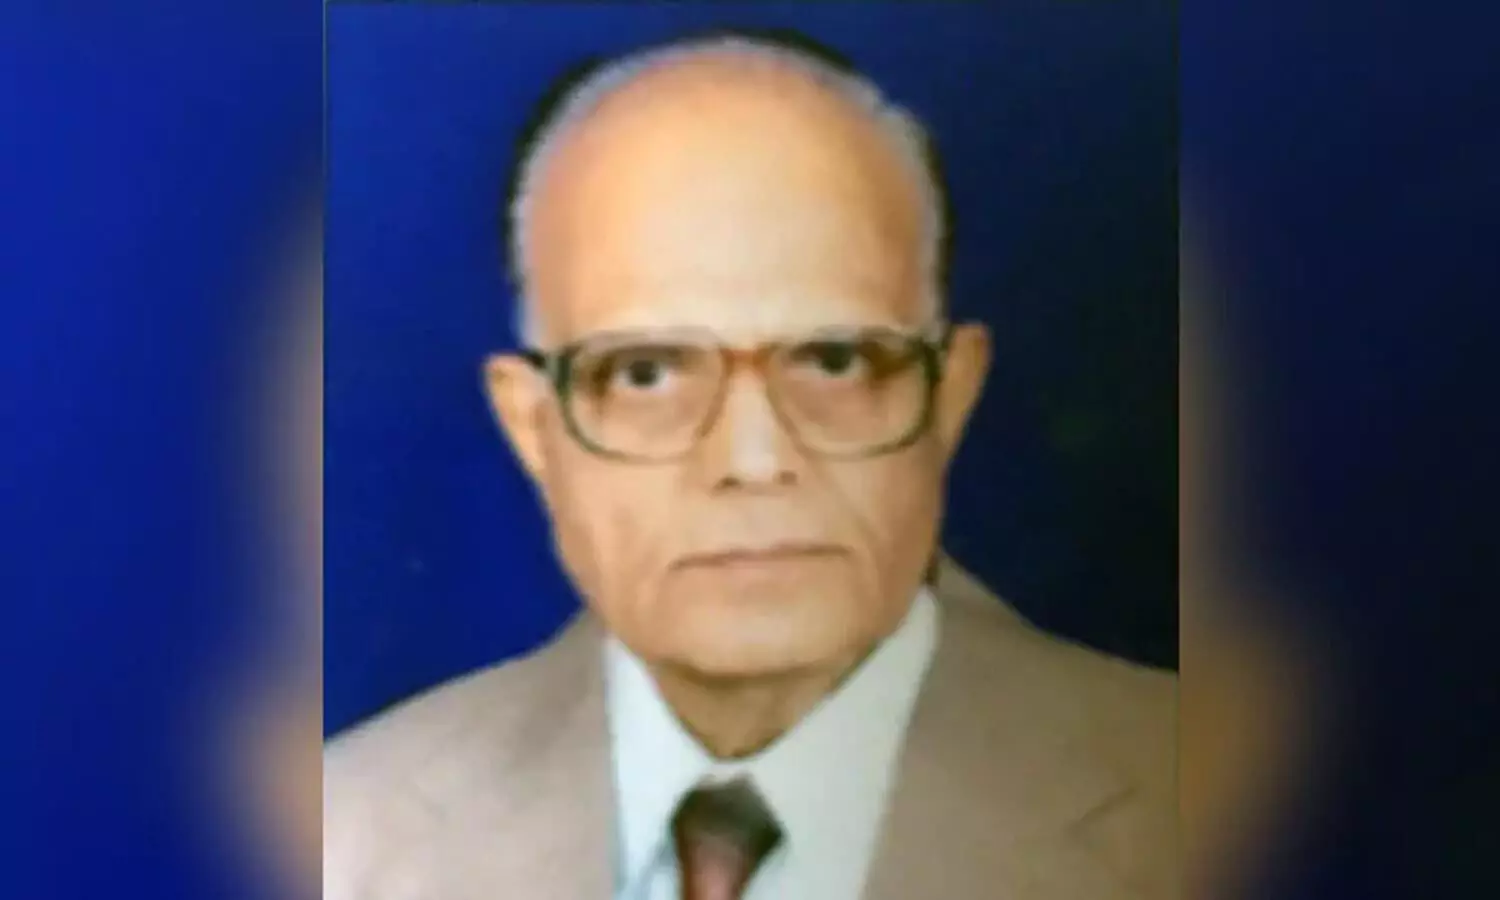 85-year-old MP Doctor, with history of cancer, pneumonia recovers from COVID-19 infection